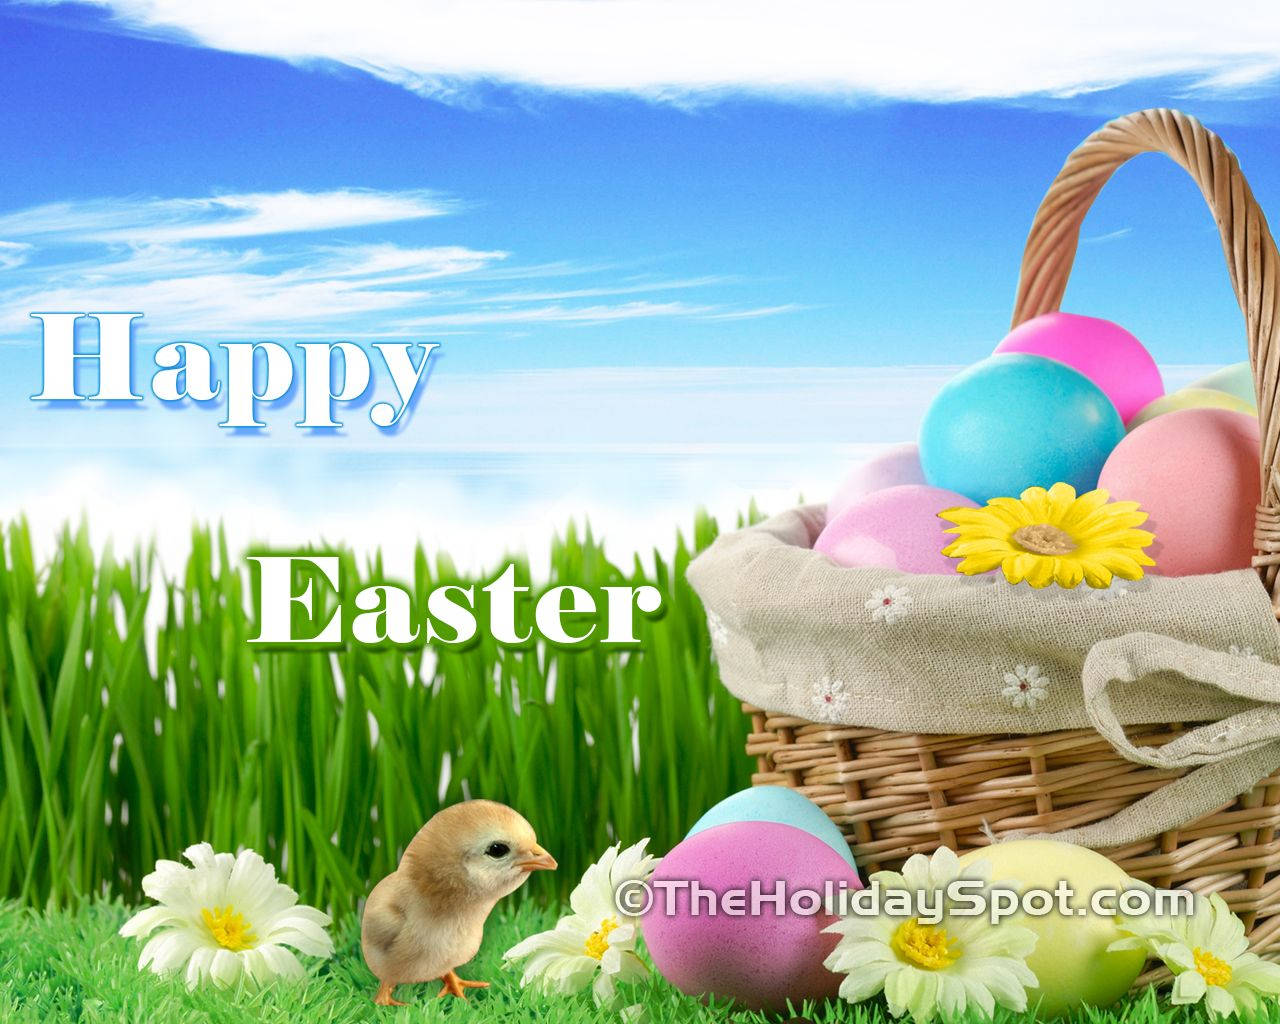 Happy Easter Greetings With Eggs And Chick Wallpaper